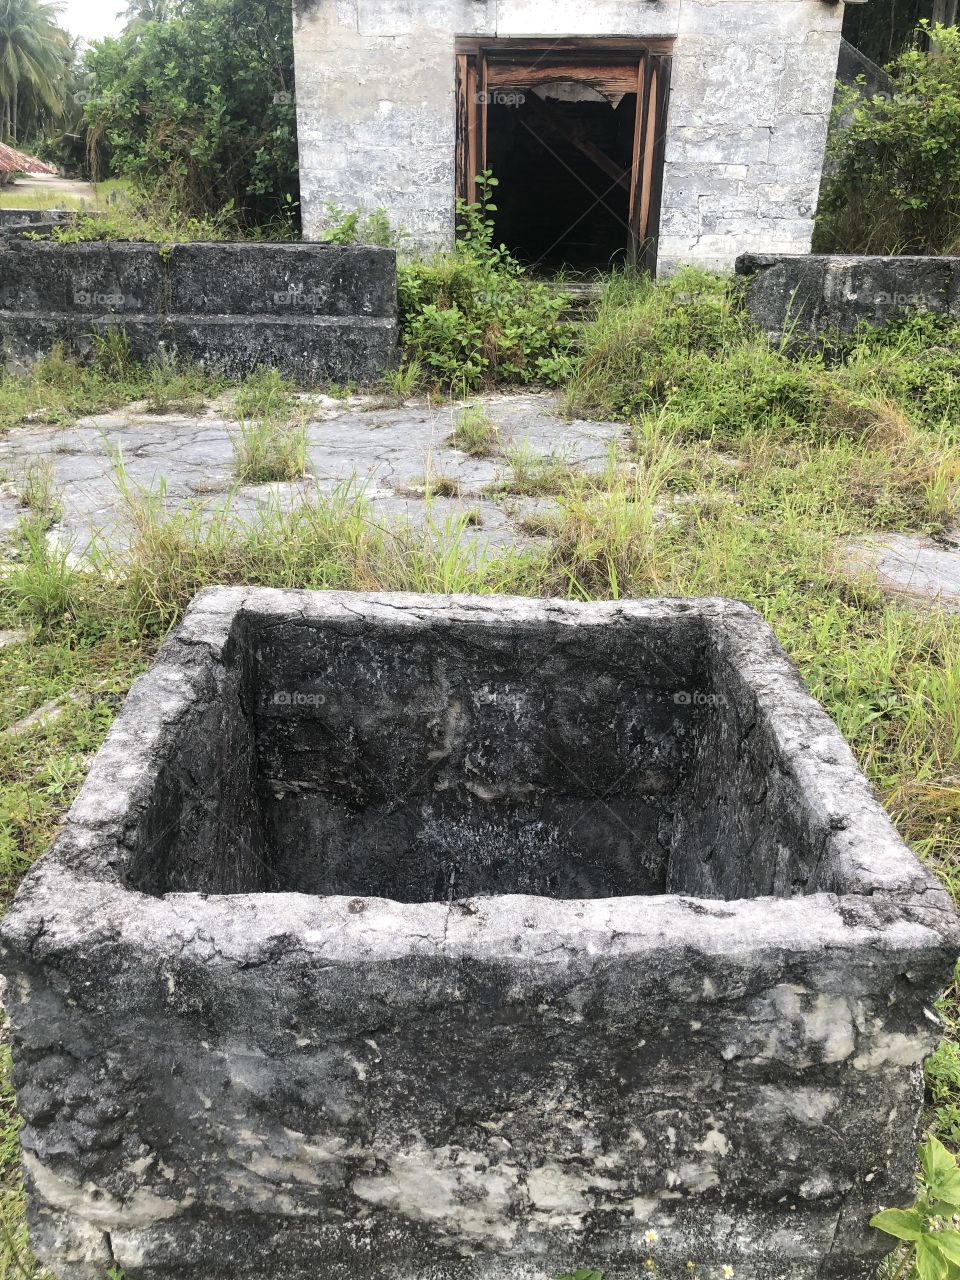 This old well was made of lime stone more than 450 years ago by locals. A nice local treasure, found in Haa Dhaalu. Nolhivaramfaru #maldives. 